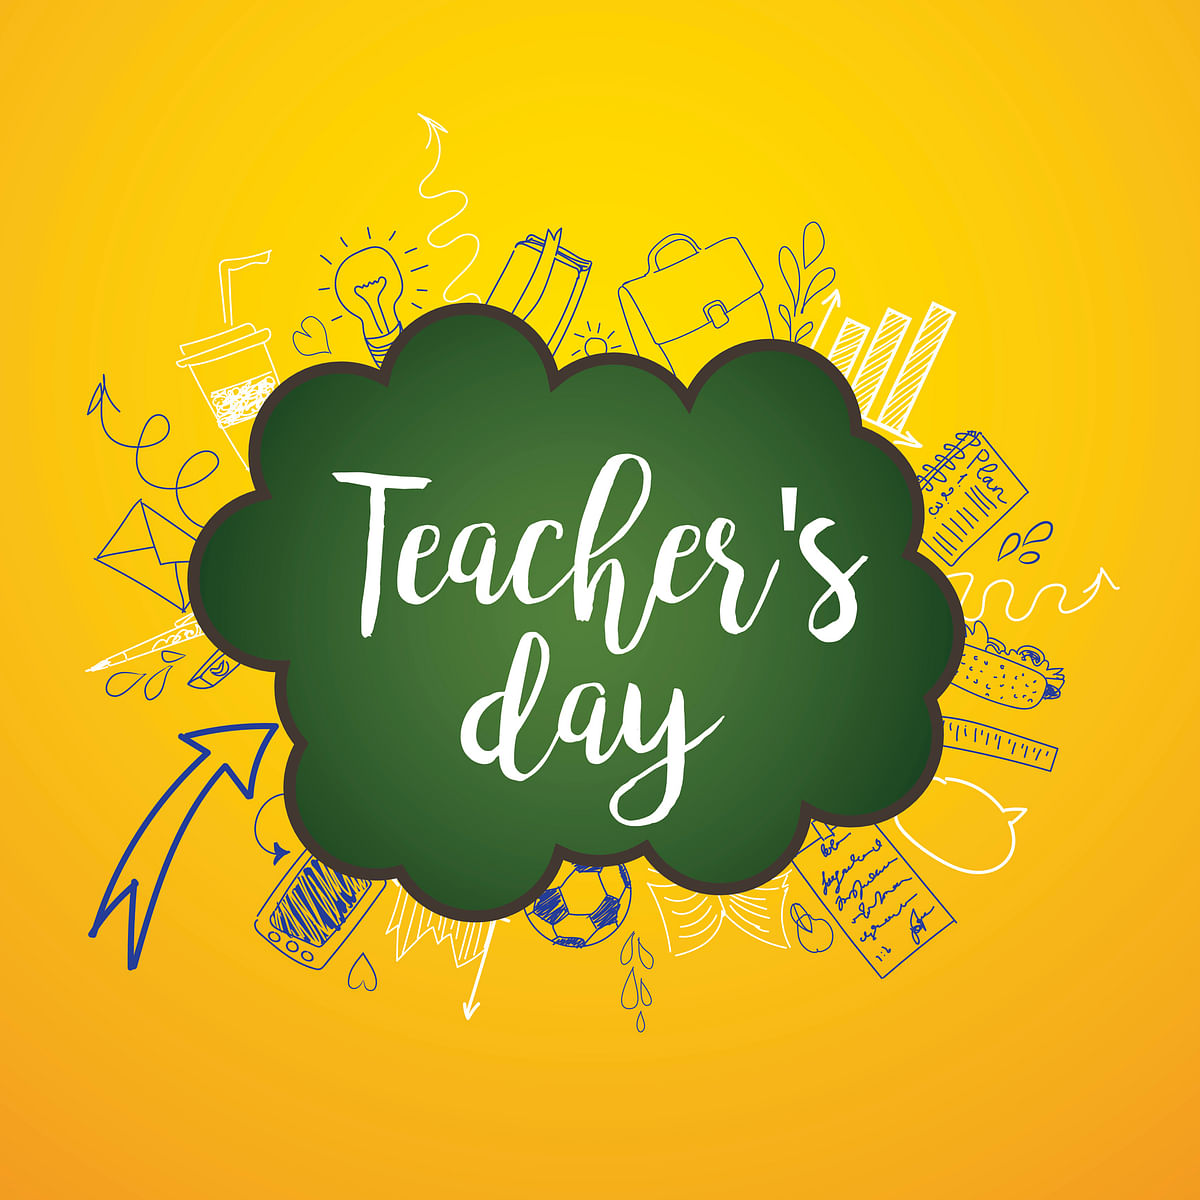 In India, Teachers' Day is celebrated every year on 5 September.